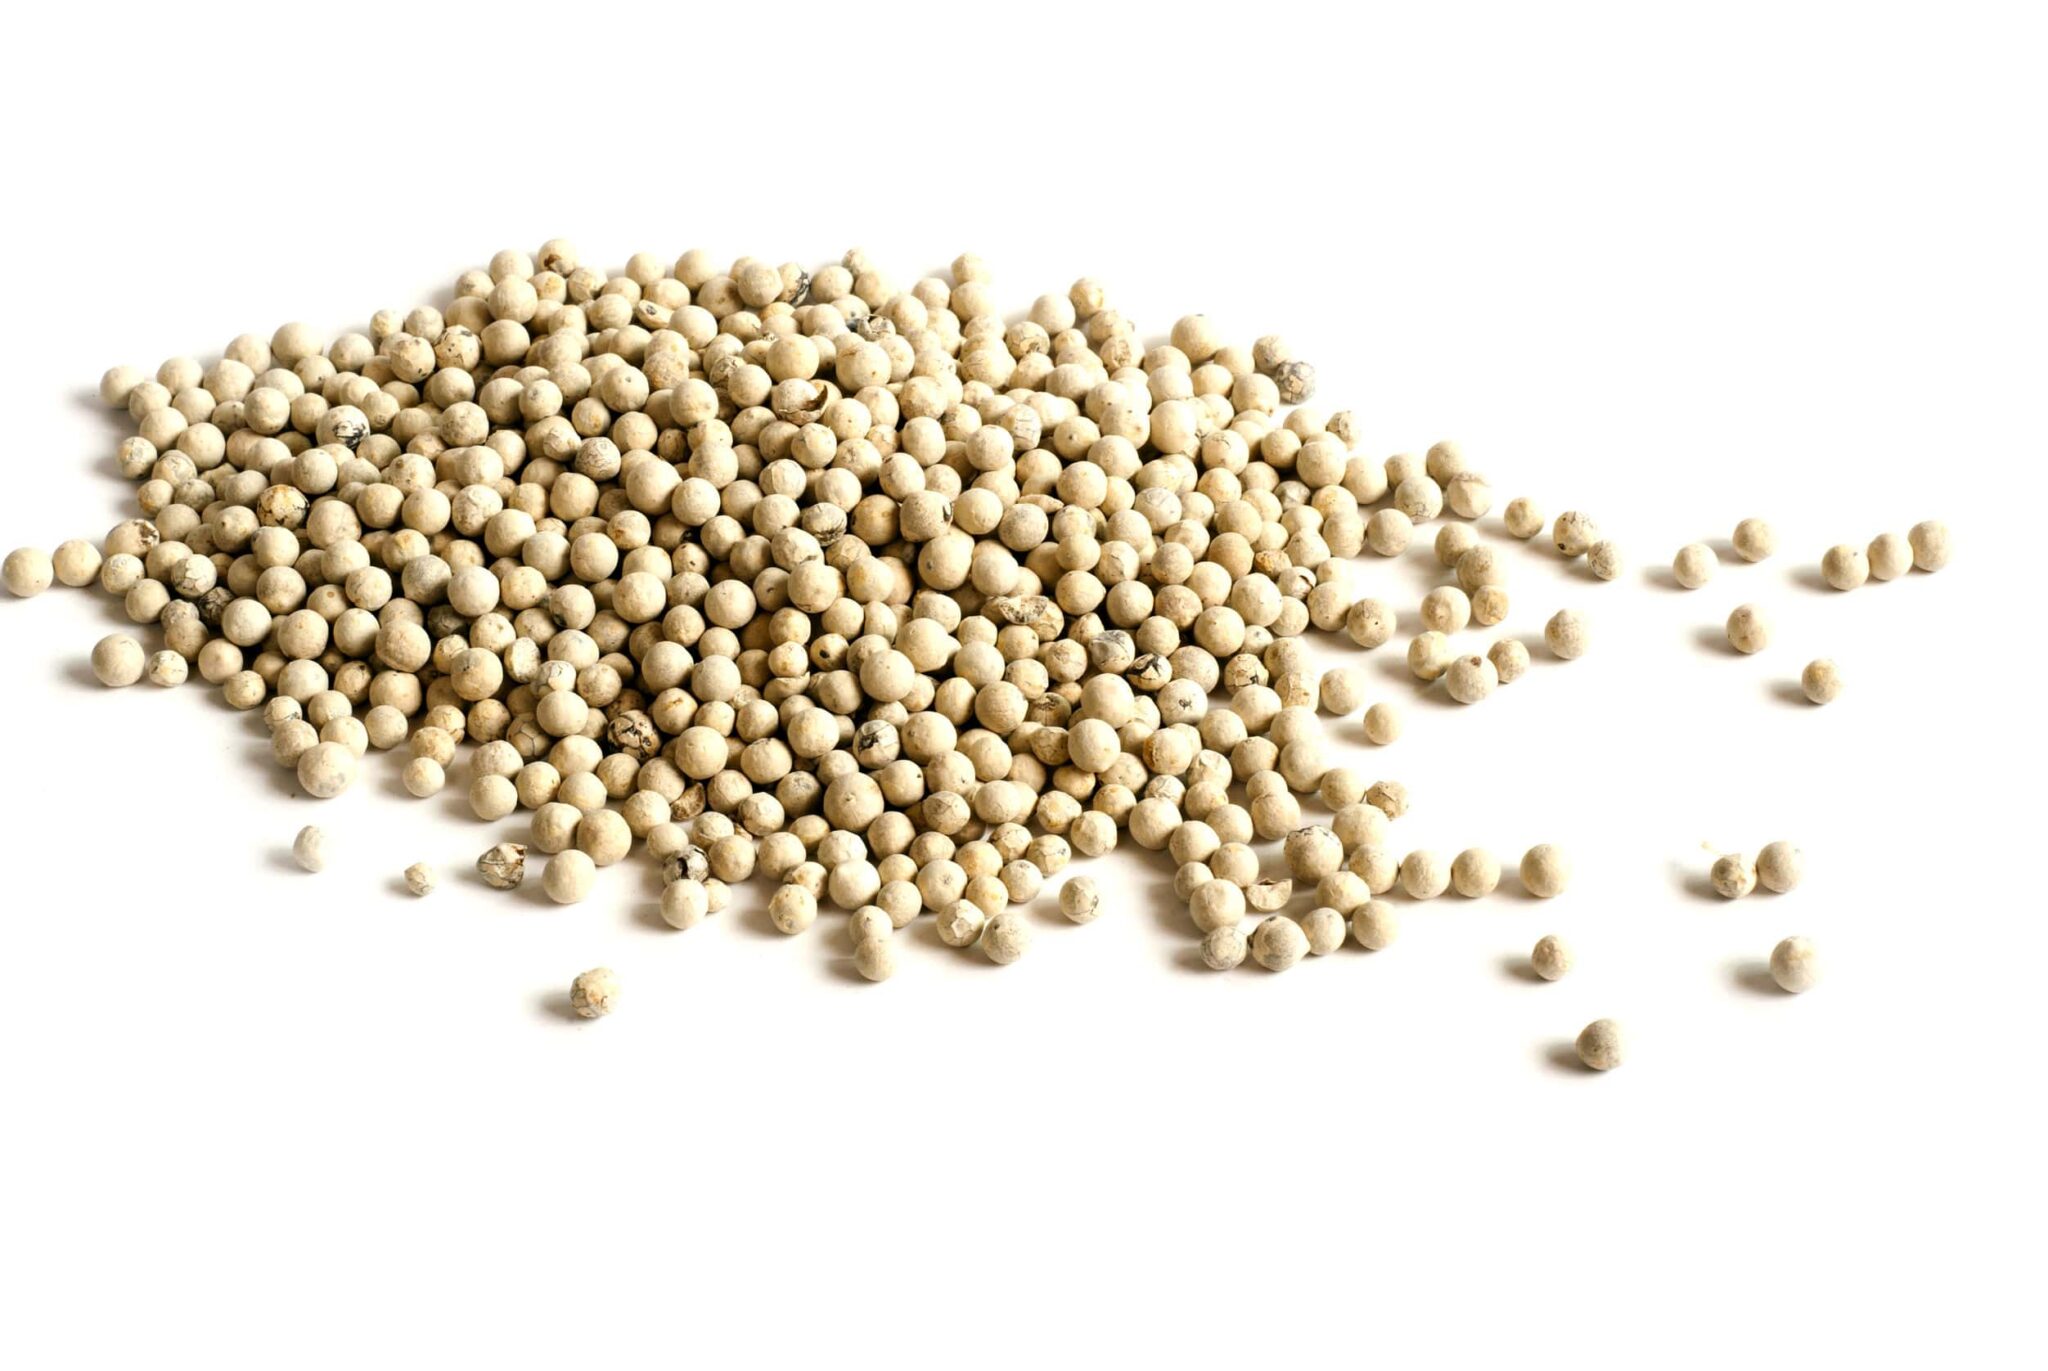 Interesting Facts about Indonesia White Pepper